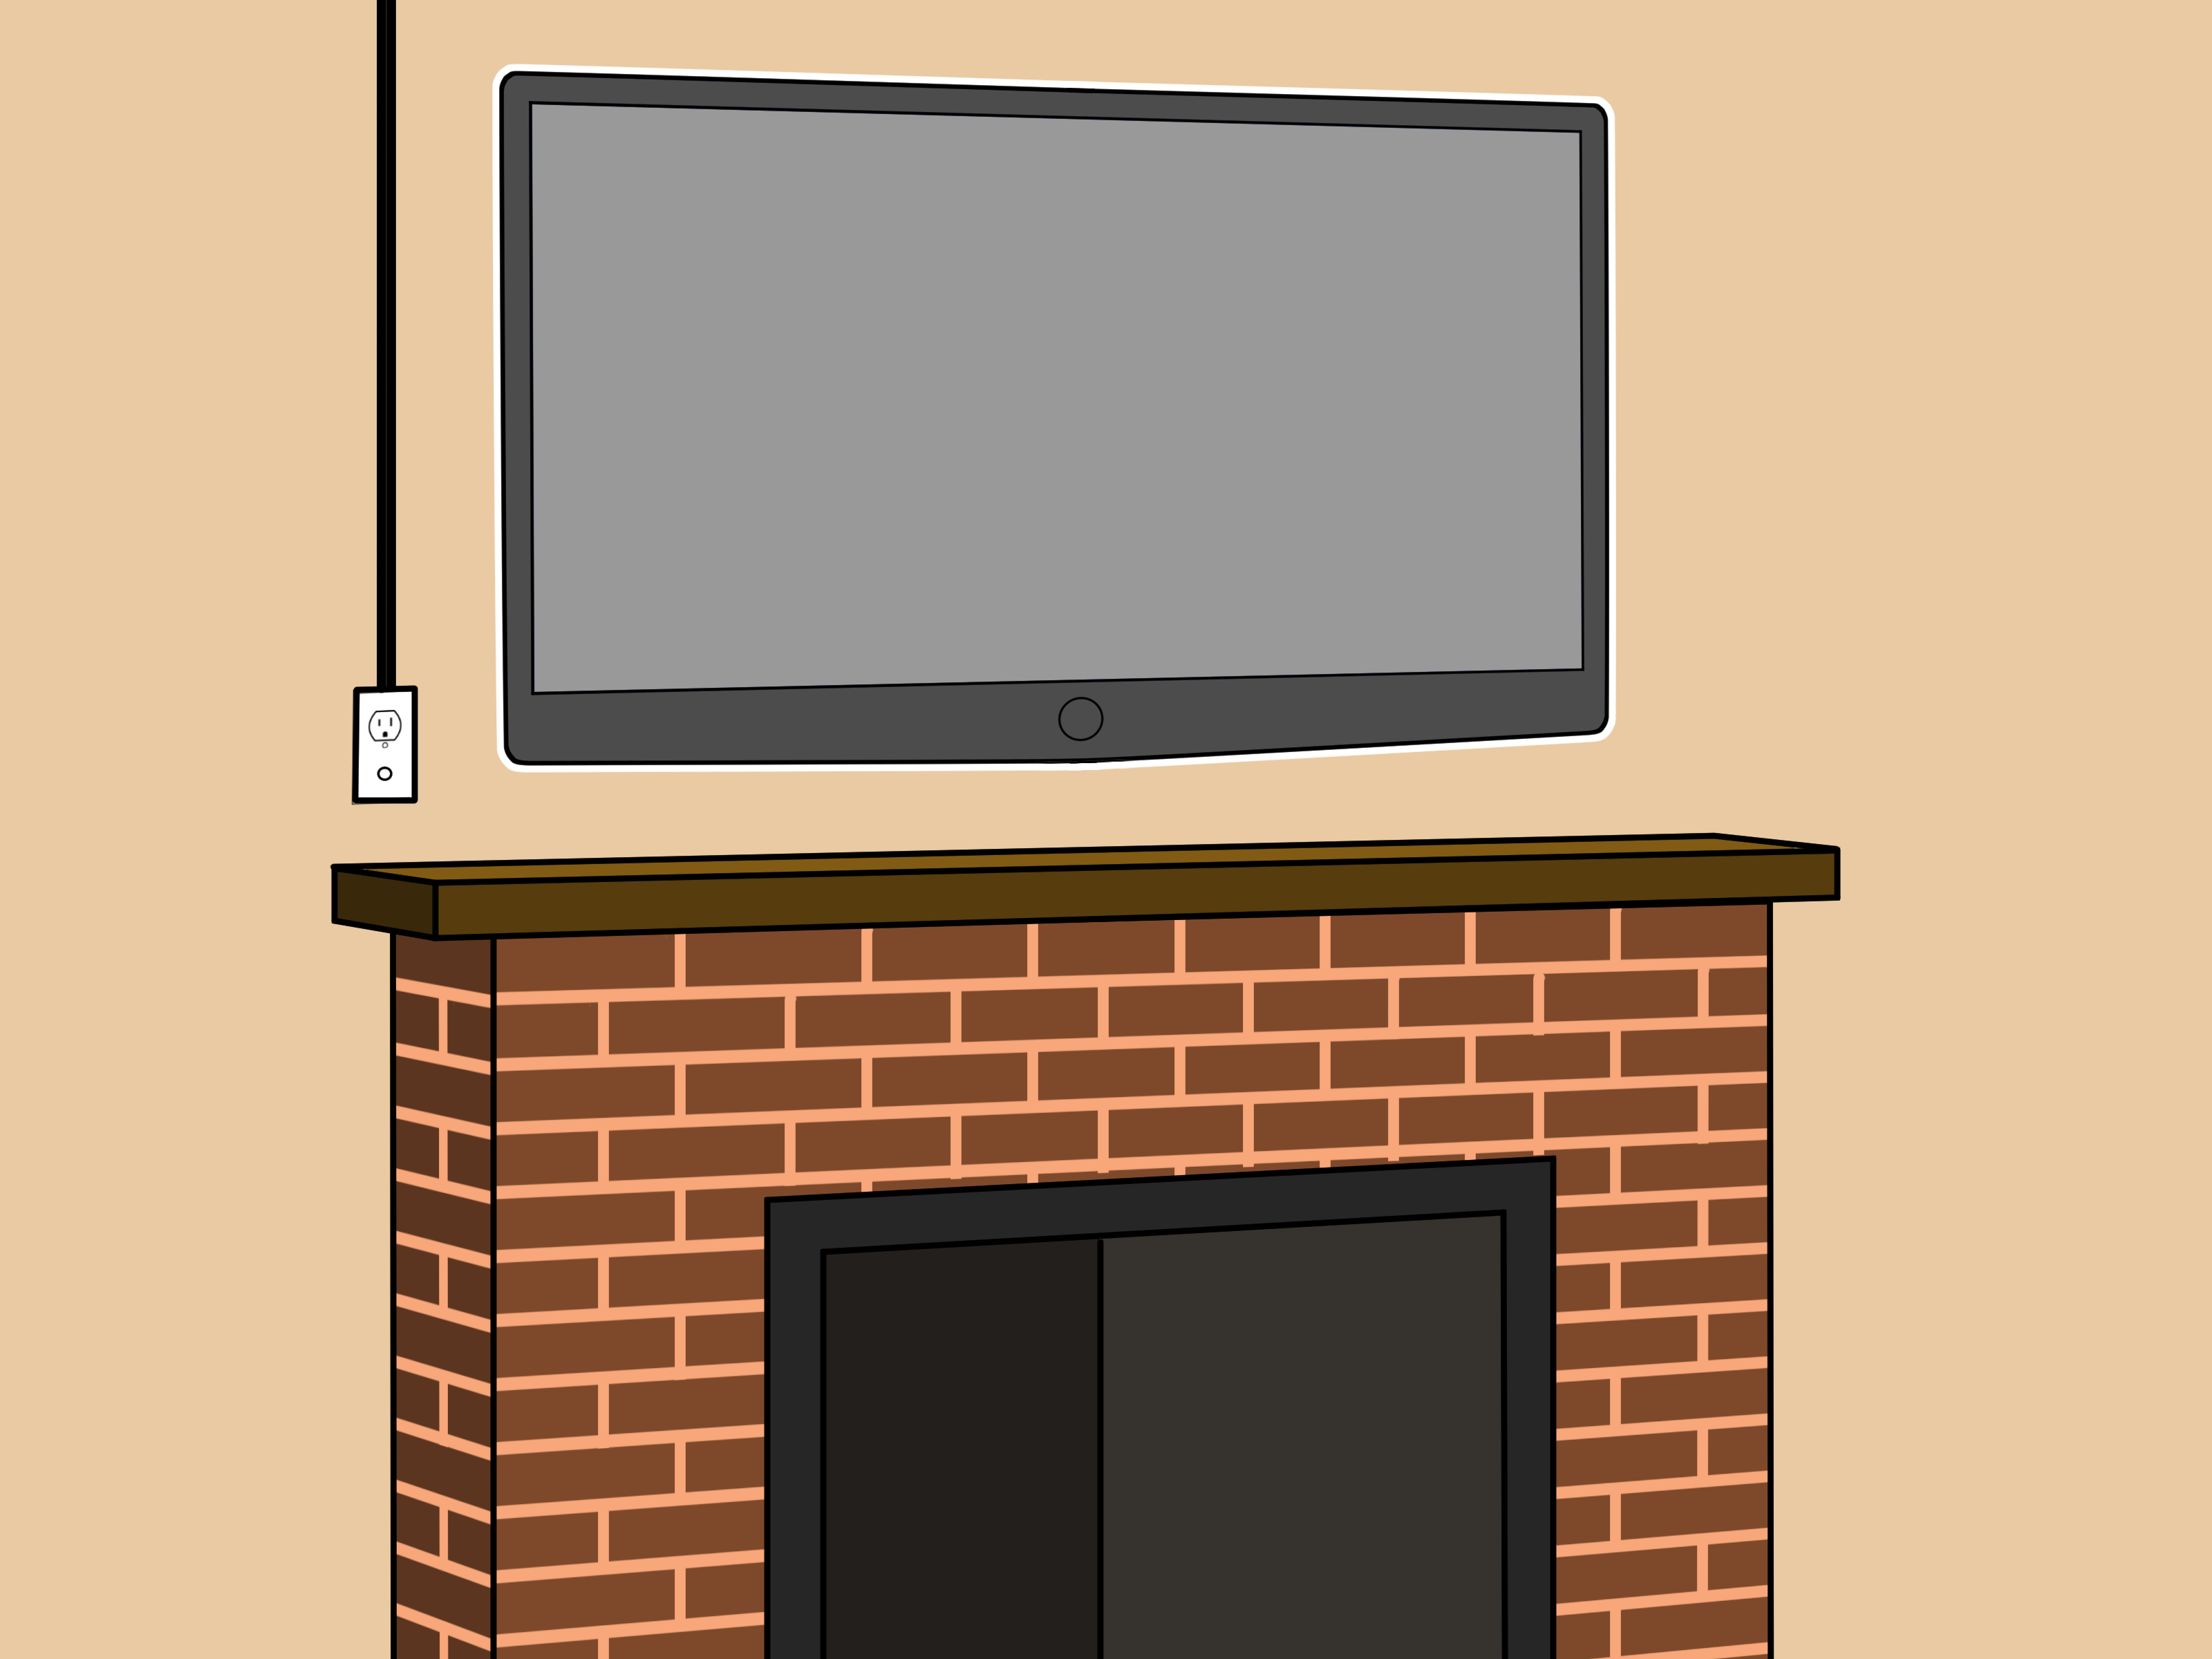 Tv Above Fireplace where to Put Cable Box Elegant How to Mount A Fireplace Tv Bracket 7 Steps with